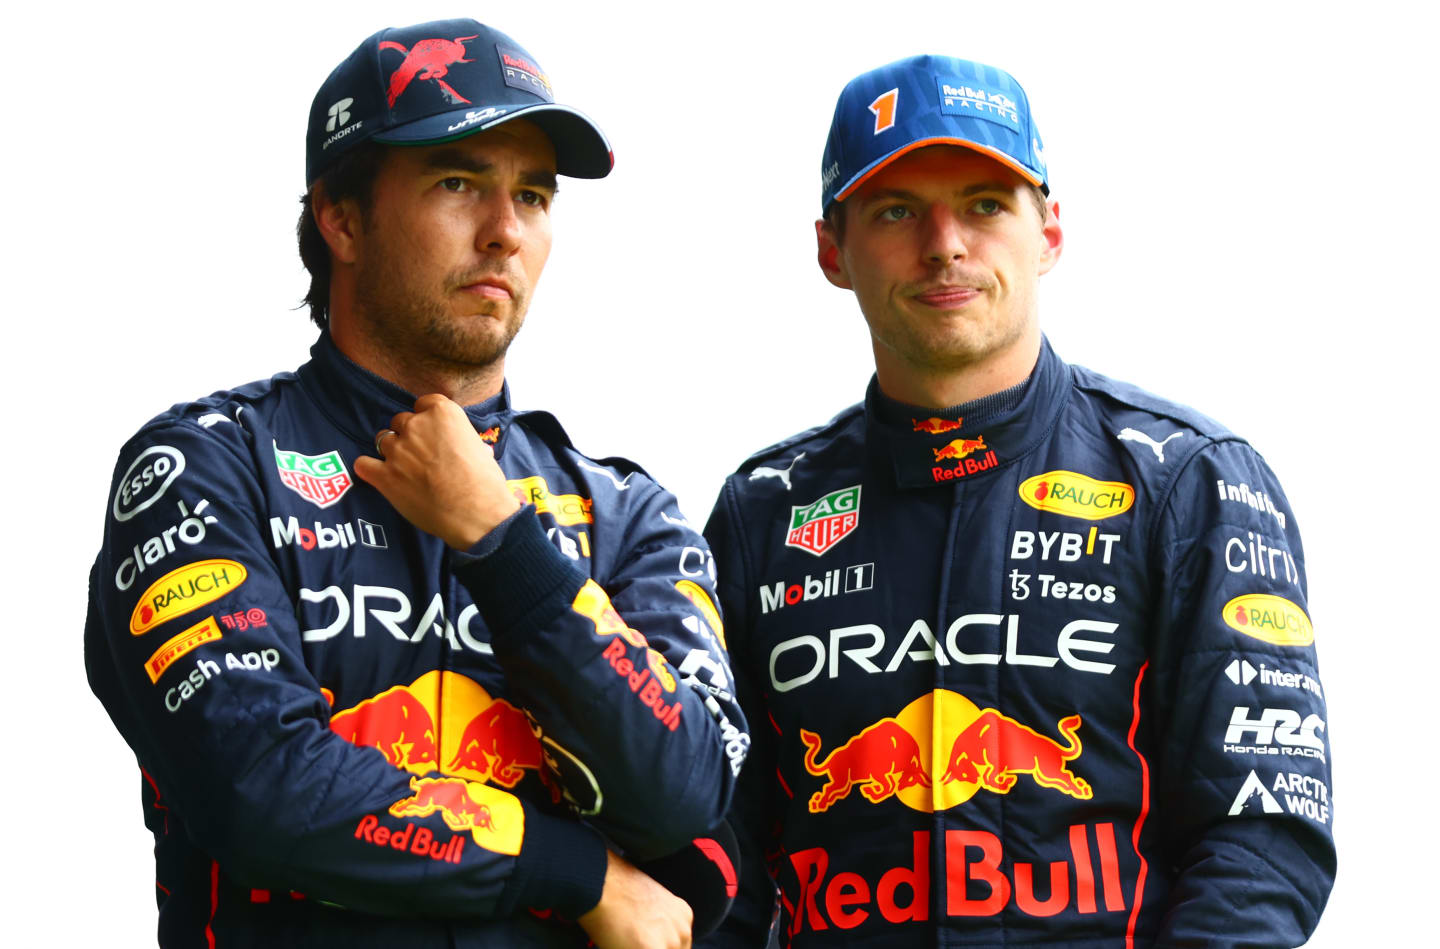 SPA, BELGIUM - AUGUST 27: Pole position qualifier Max Verstappen of the Netherlands and Oracle Red Bull Racing and Third placed qualifier Sergio Perez of Mexico and Oracle Red Bull Racing talk in parc ferme during qualifying ahead of the F1 Grand Prix of Belgium at Circuit de Spa-Francorchamps on August 27, 2022 in Spa, Belgium. (Photo by Dan Istitene - Formula 1/Formula 1 via Getty Images)